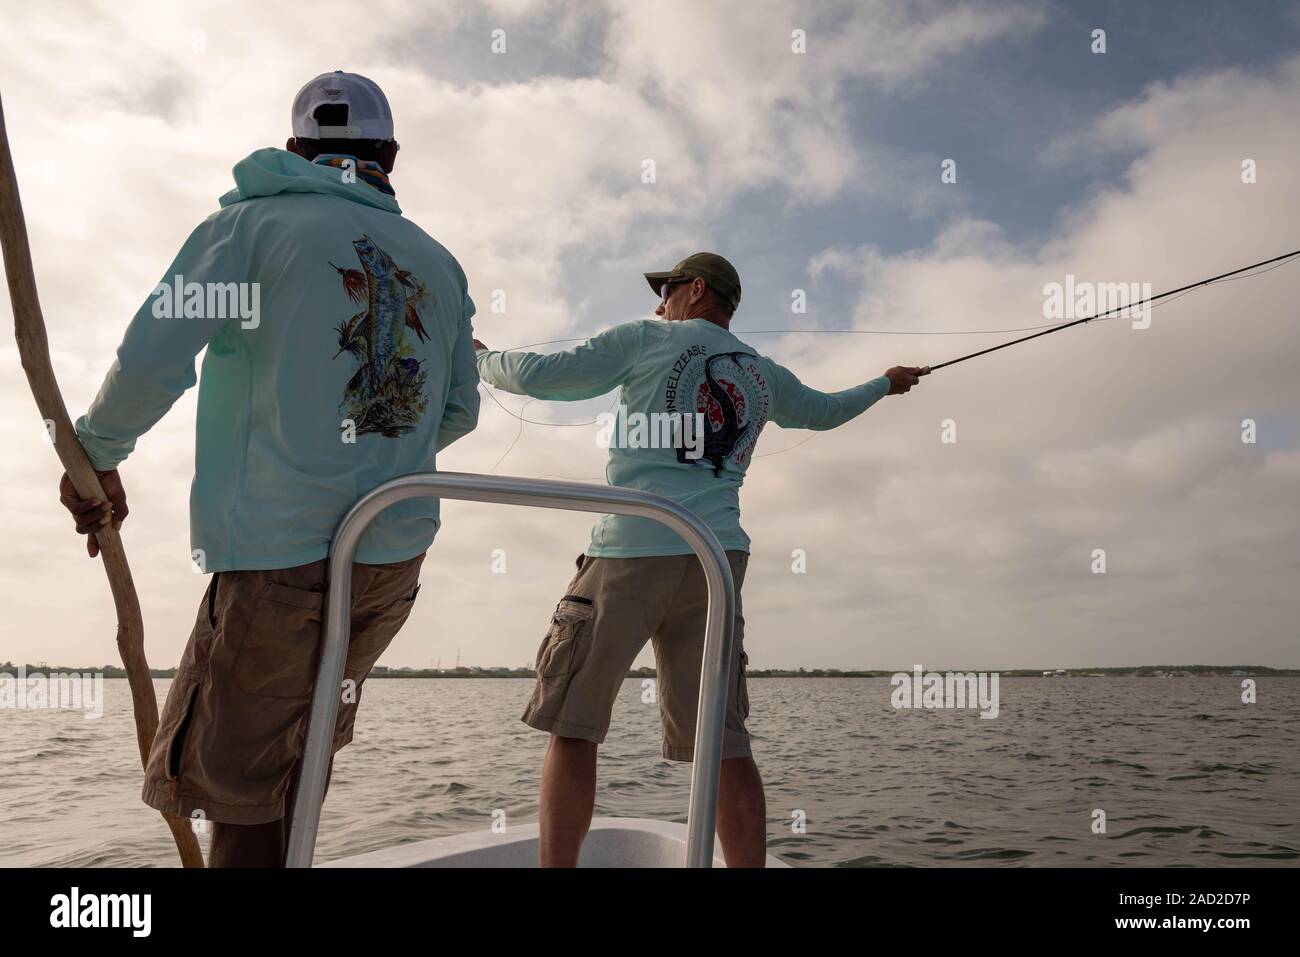 Ambergris Caye, Belize - November, 16, 2019.   Local fishing guide instructs a fly fisherman on casting technique used in saltwater fishing as he stan Stock Photo